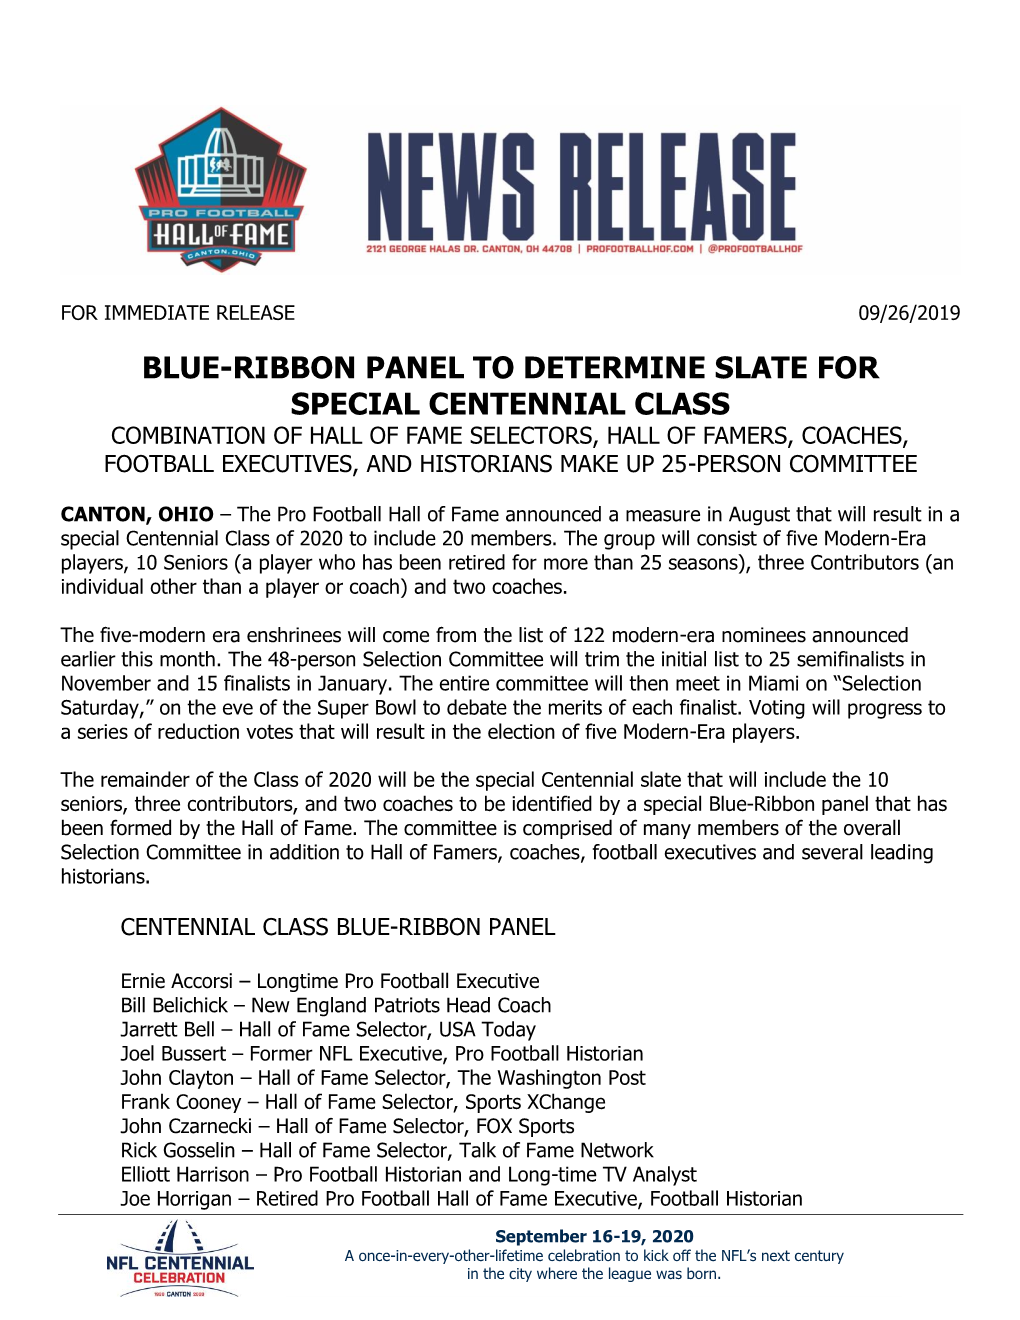 Blue-Ribbon Panel to Determine Slate for Special Centennial Class